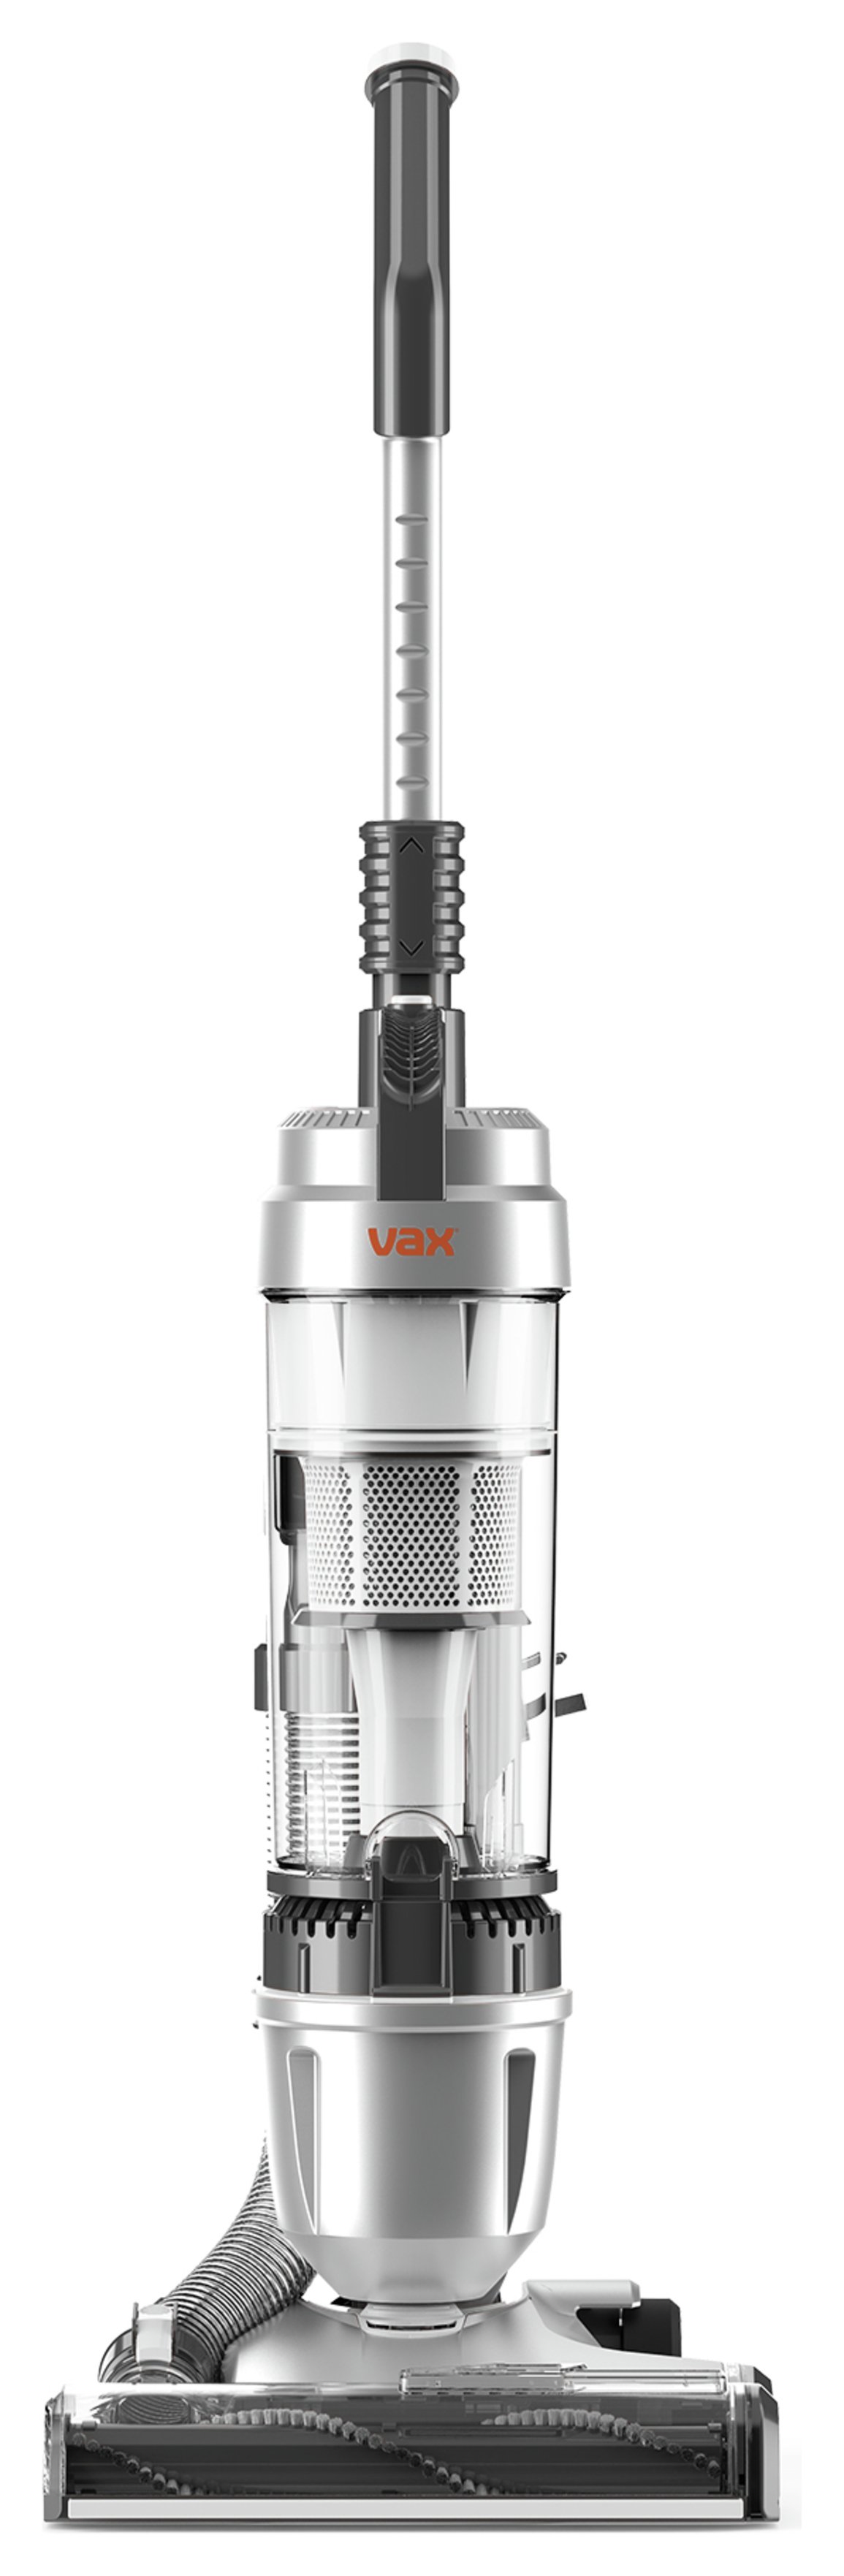 Vax Air Stretch Pet Plus Upright Vacuum Cleaner - U85-AS-Ppe Review